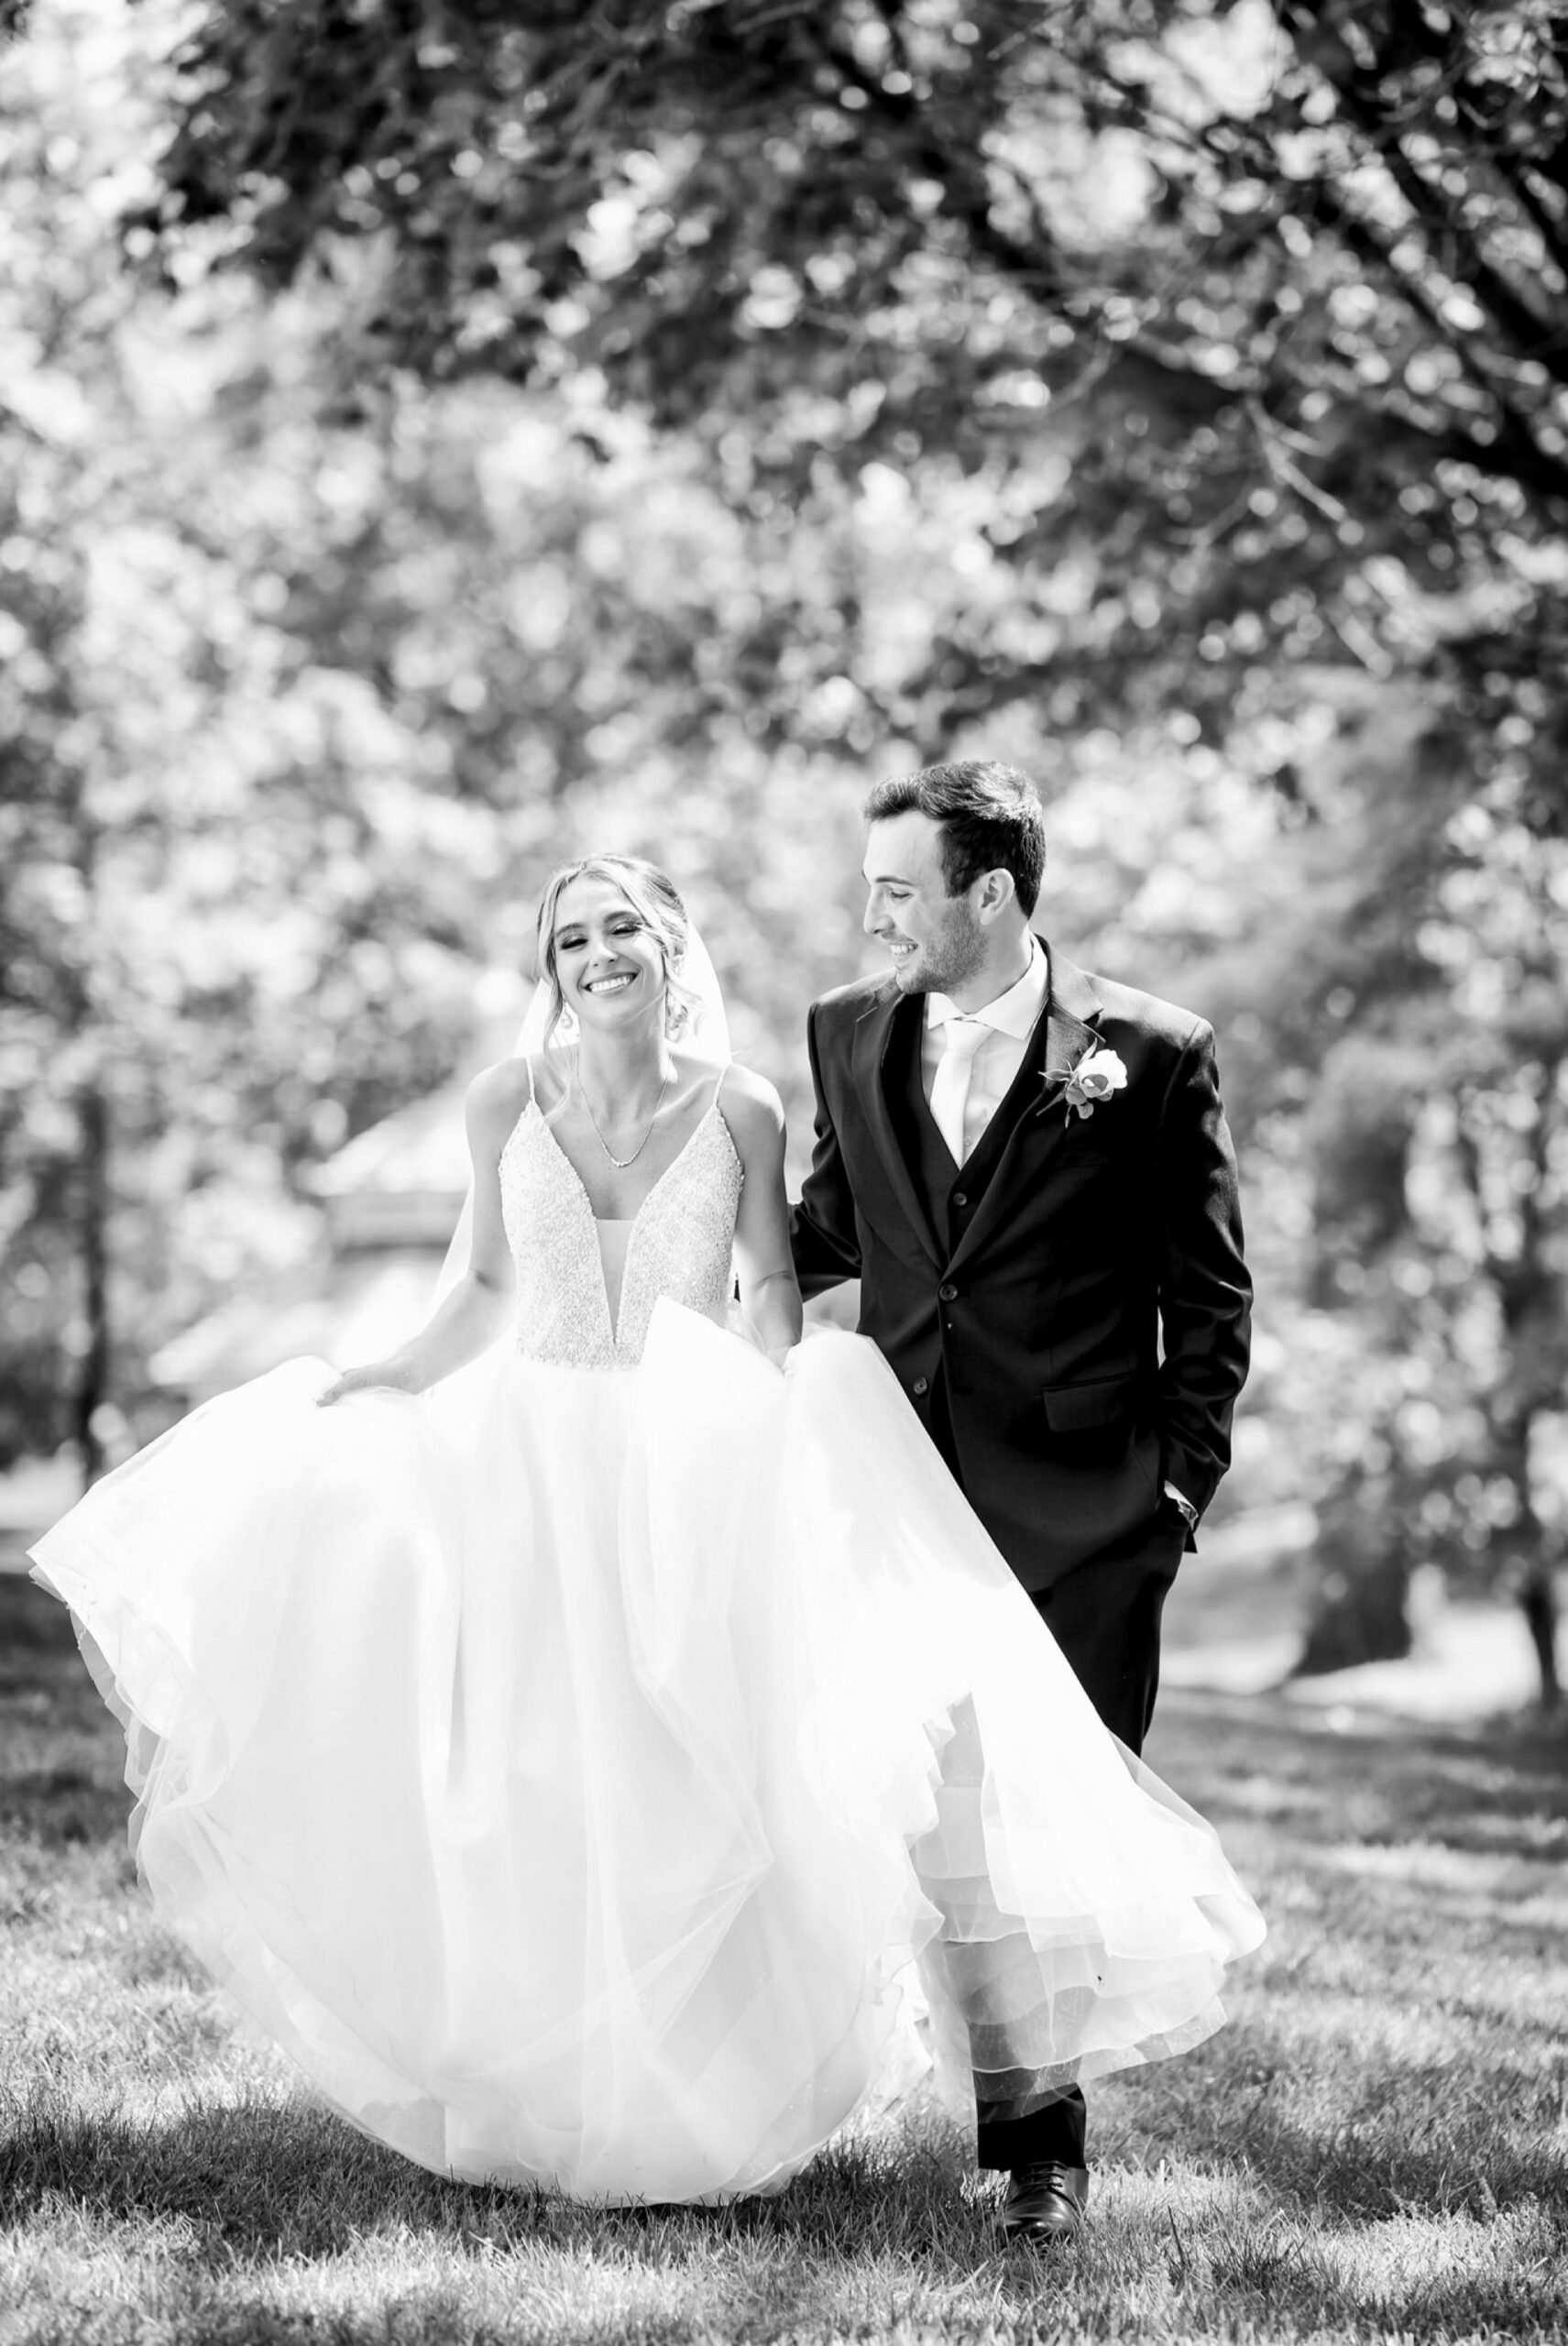 Carrying her dress, a bride laughs as she walks with her husband on her wedding day.  